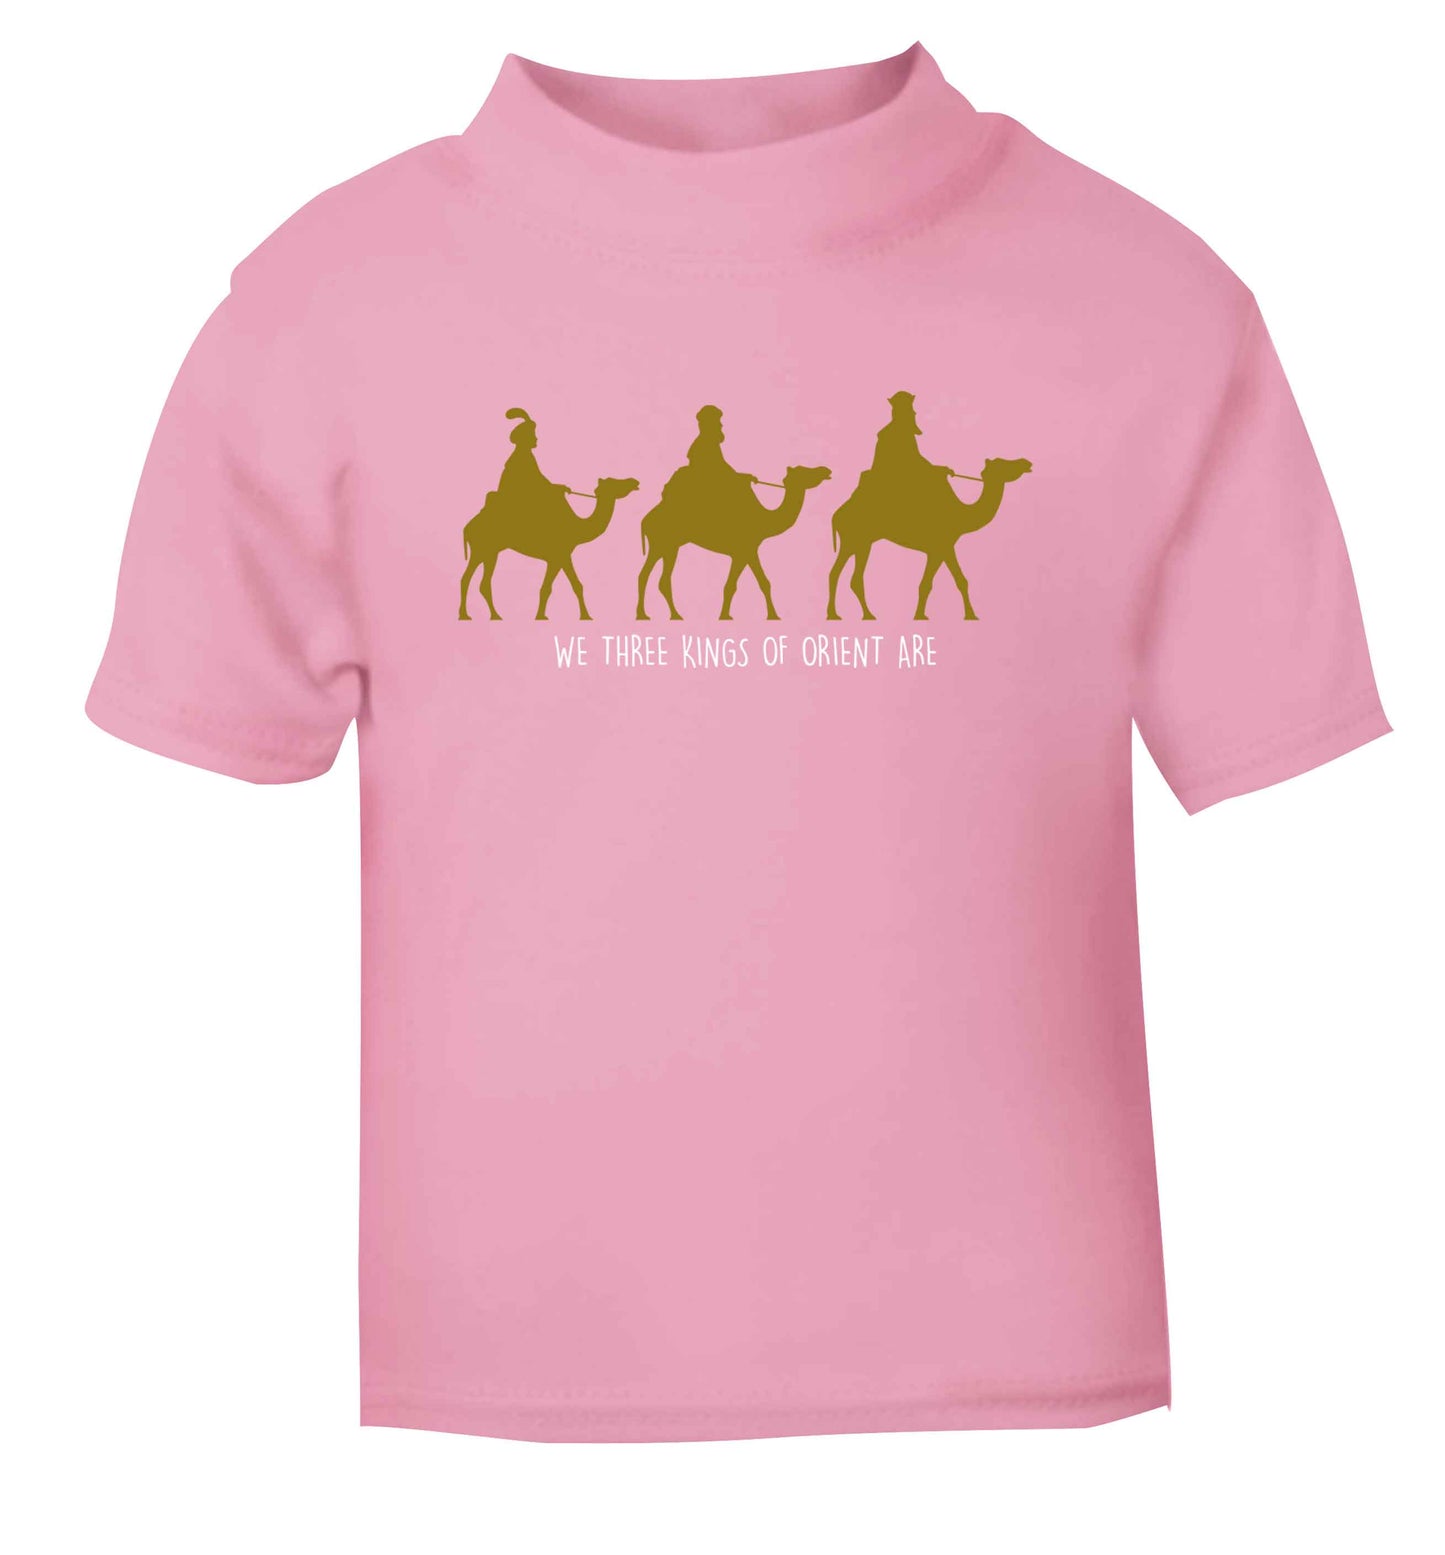 We three kings of orient are light pink baby toddler Tshirt 2 Years